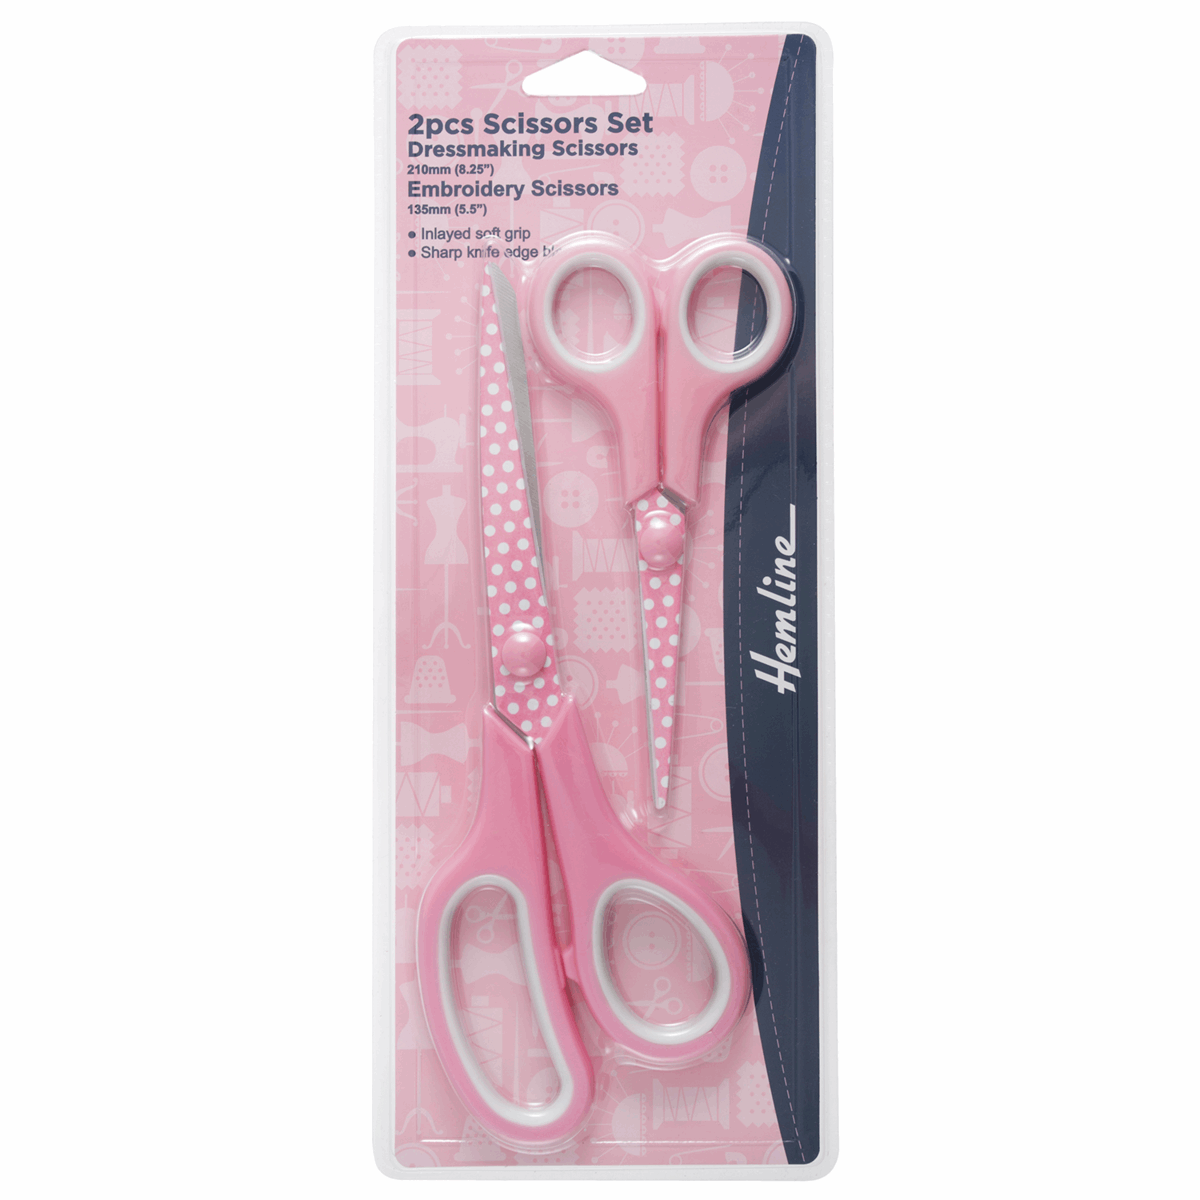 Set of 2 x Sewing Scissors - Dressmaking and Embroidery (Pink)